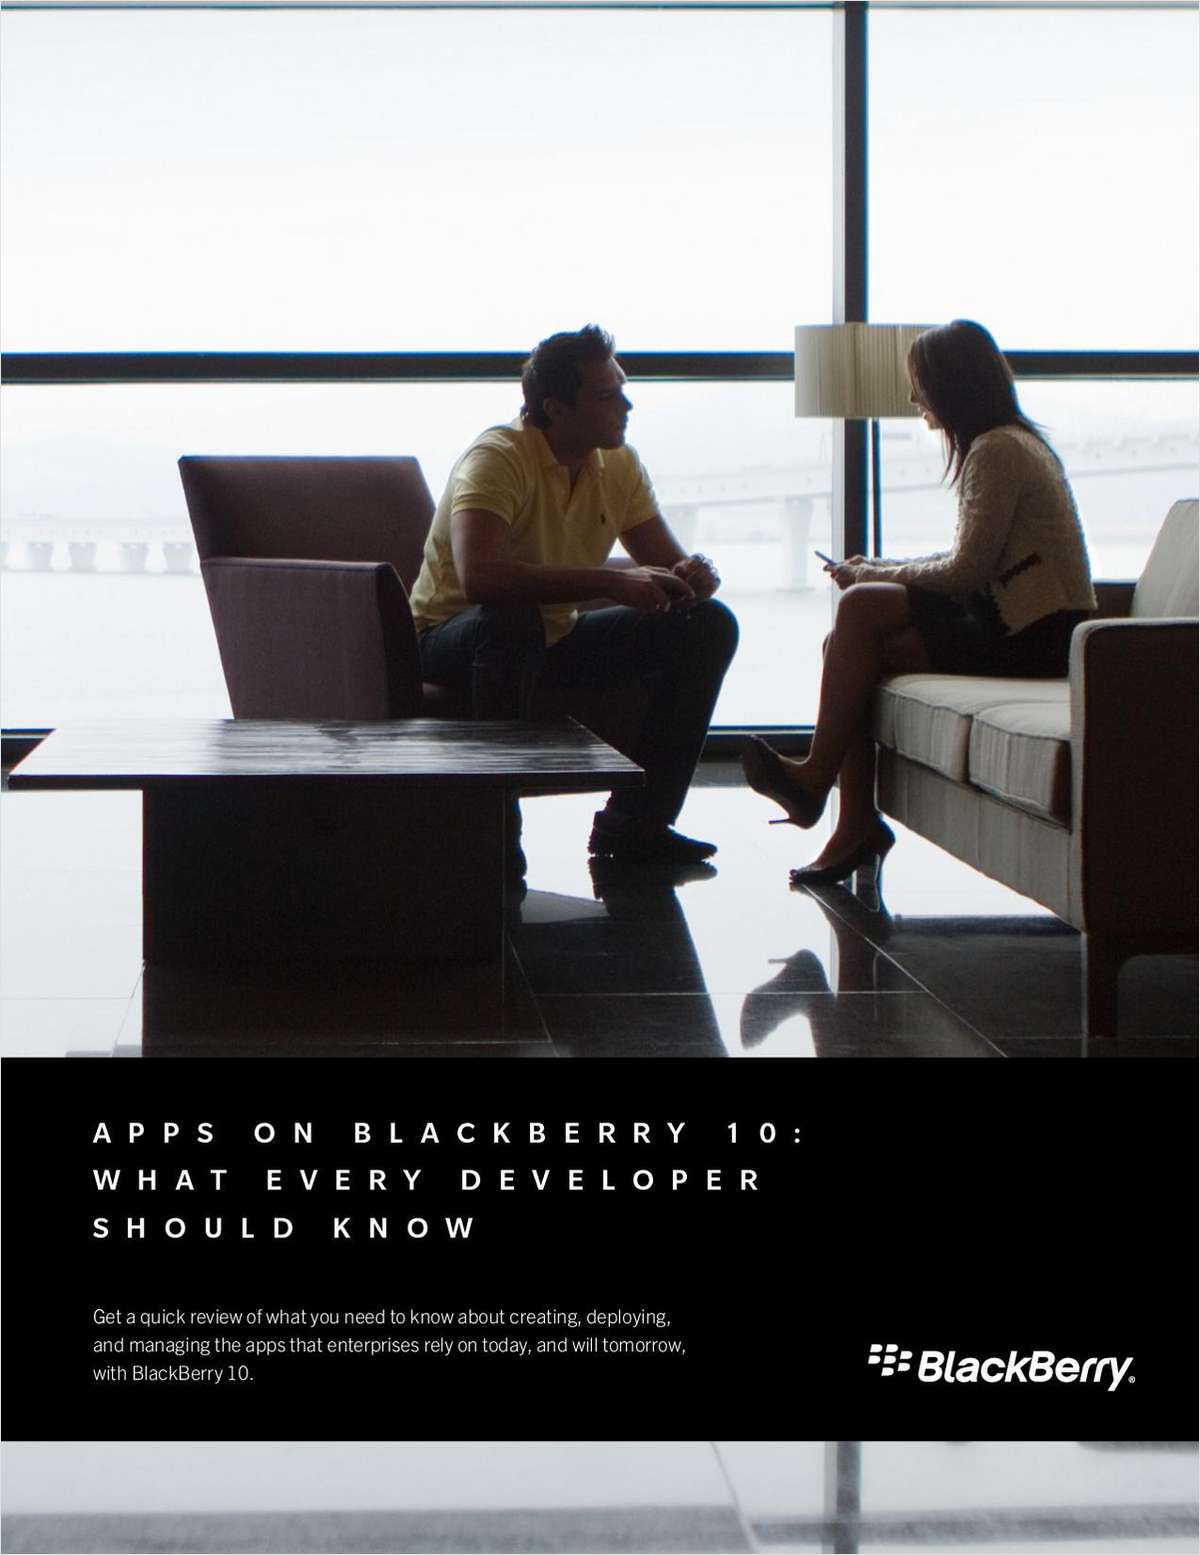 Apps on BlackBerry 10: What Every Developer Should Know